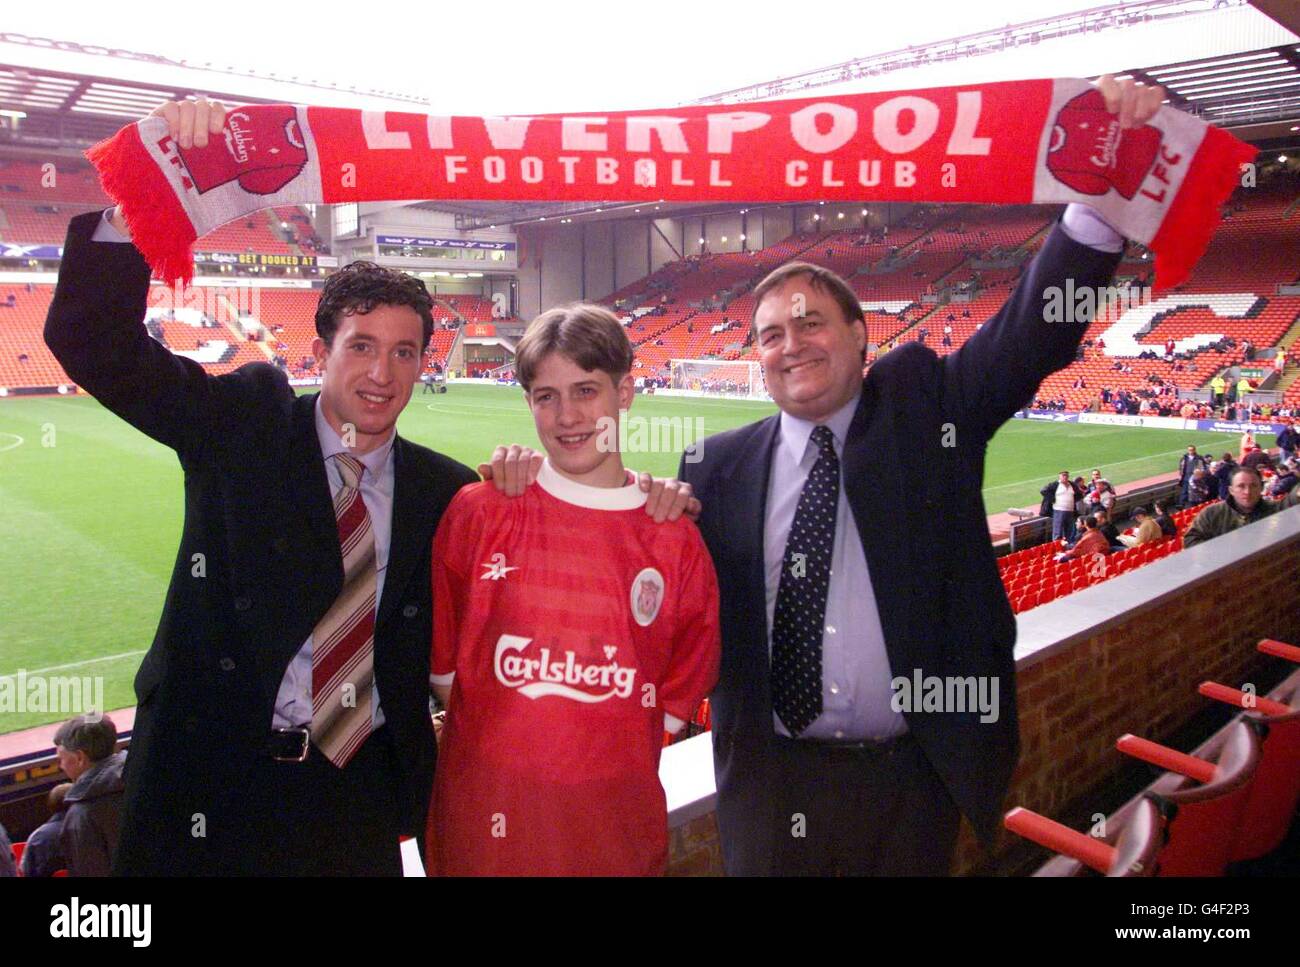 Ronan McGrory, (centre) an Omagh bombing survivor with Liverpool striker Robbie Fowler(left) and Deputy Prime Minister John Prescott at the Liverpool versus Nottingham Forest FA Carling Premiership match, Anfield today (Saturday). Liverpool fan Ronan asked on waking up in hospital what the Liverpool score was and Prescott who was visiting the hospital the day after the bombing promised to take him to the game when he recovered. Watch for PA story. Photo by Owen Humphreys/PA Stock Photo